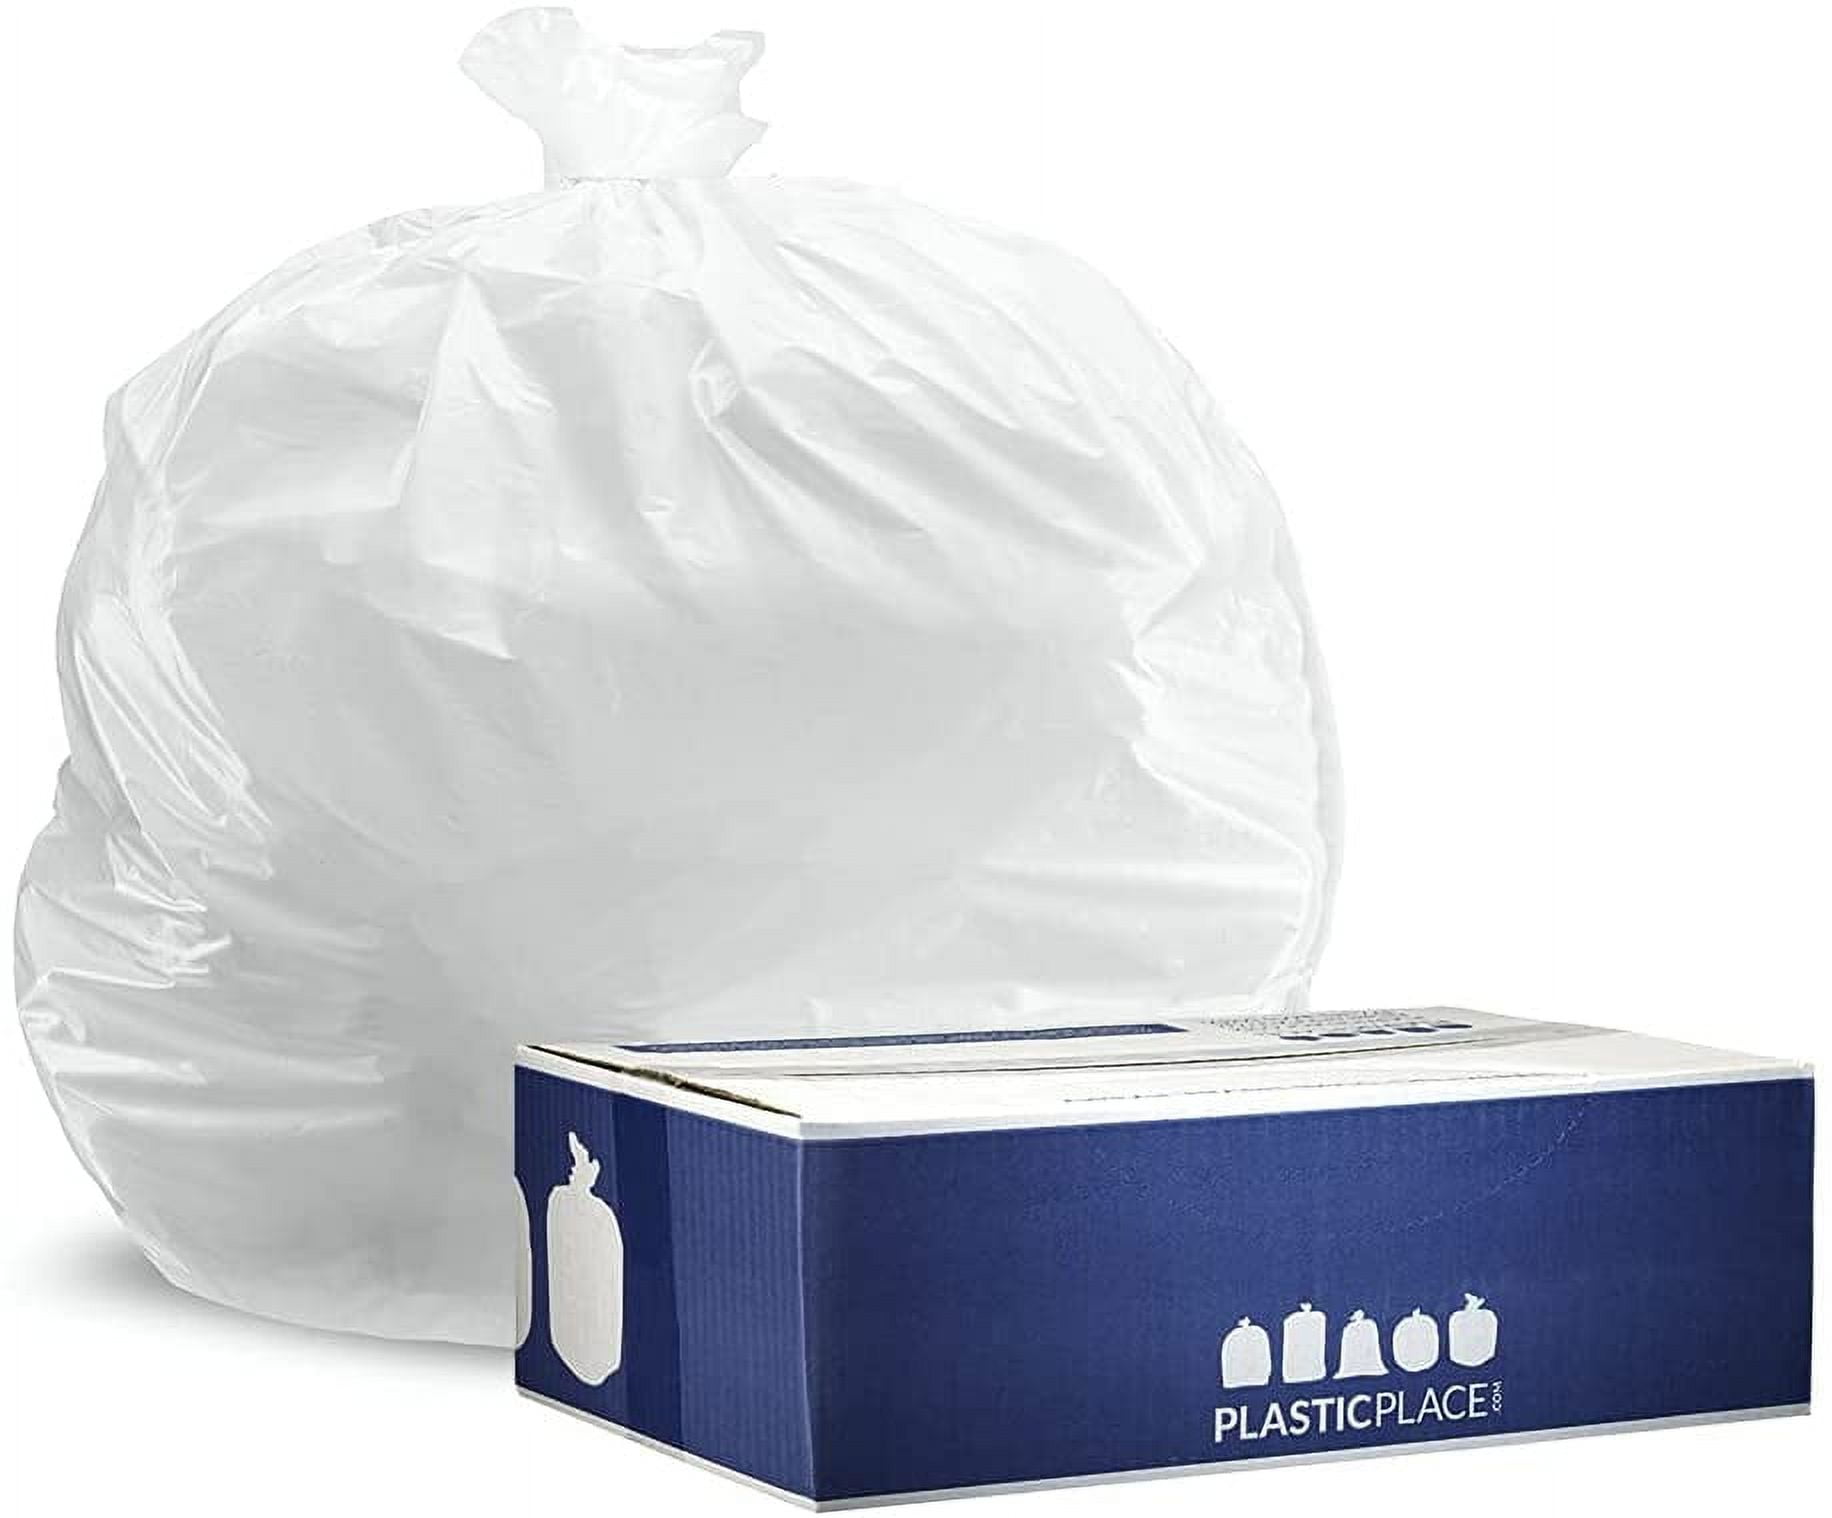 Plasticplace 12-16 Gallon Trash Bags - Black, Case of 250 Garbage Bags